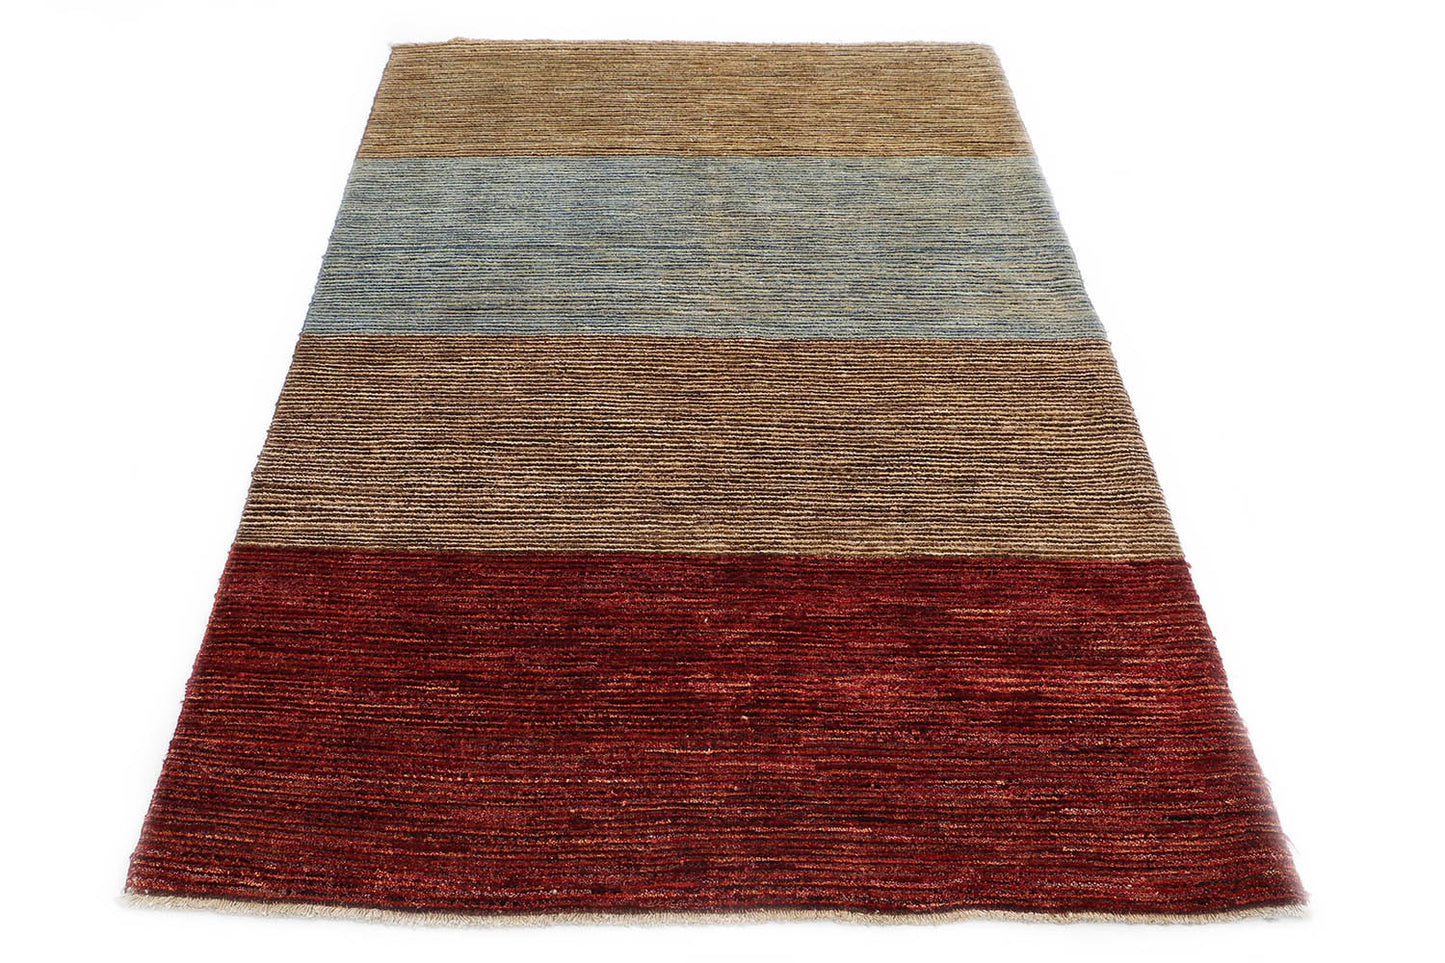 Traditional Hand-Knotted Gabbeh Baluch Area Rugs Beige/Red Color 100% Wool Rugs (4 x 6) 4x6